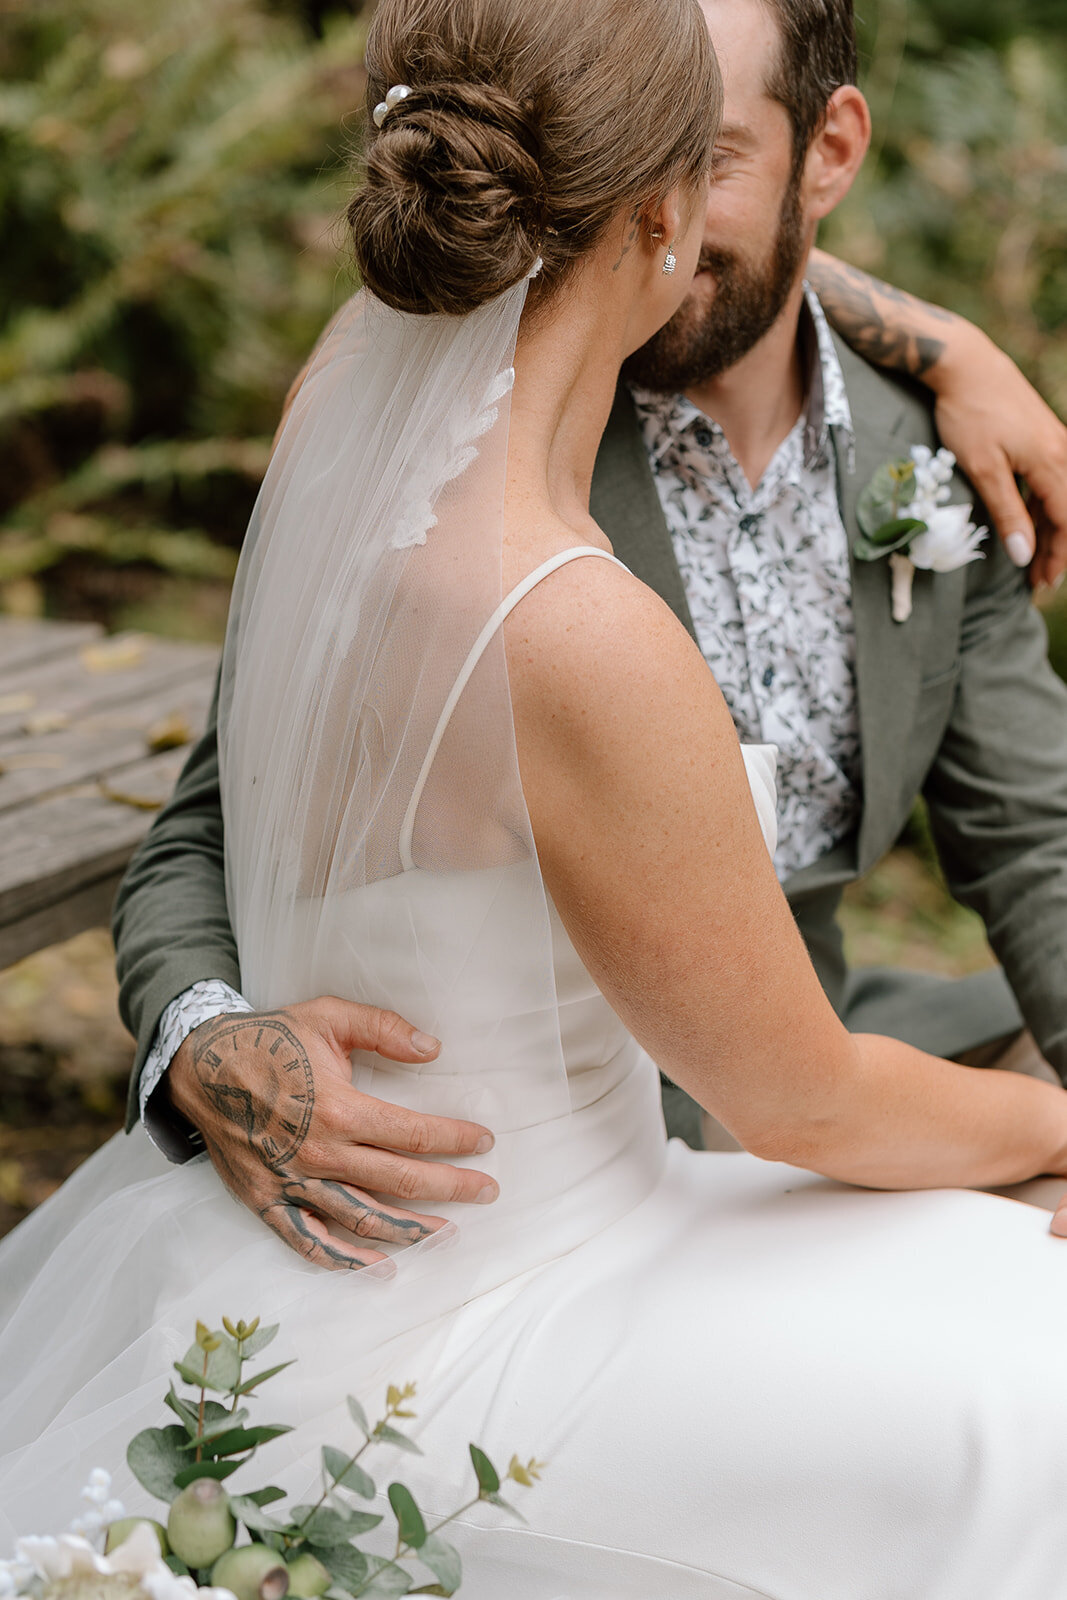 Stacey&Cory-Coast&Pines-413